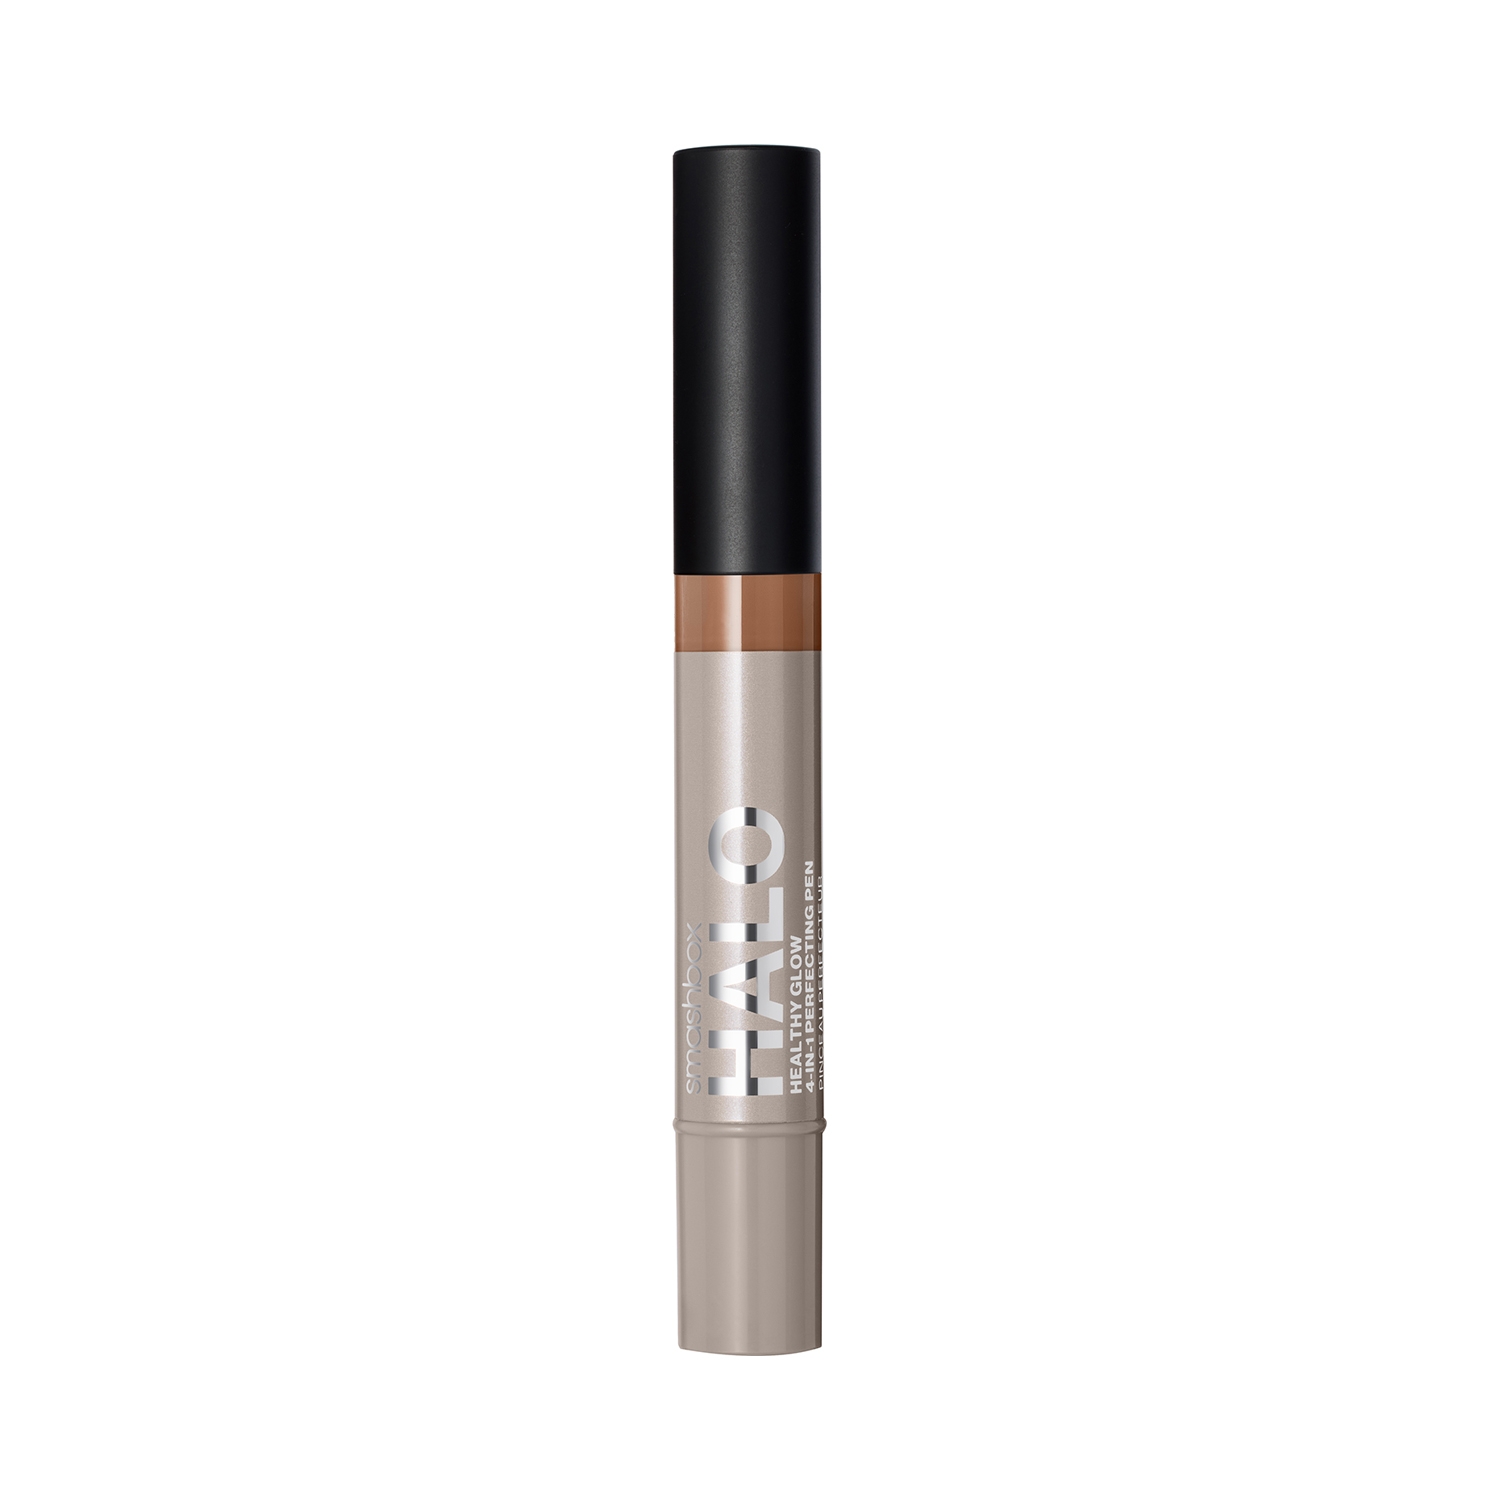 Smashbox | Smashbox Halo Healthy Glow 4-In-1 Perfecting Concealer Pen - M30N (3.5ml)